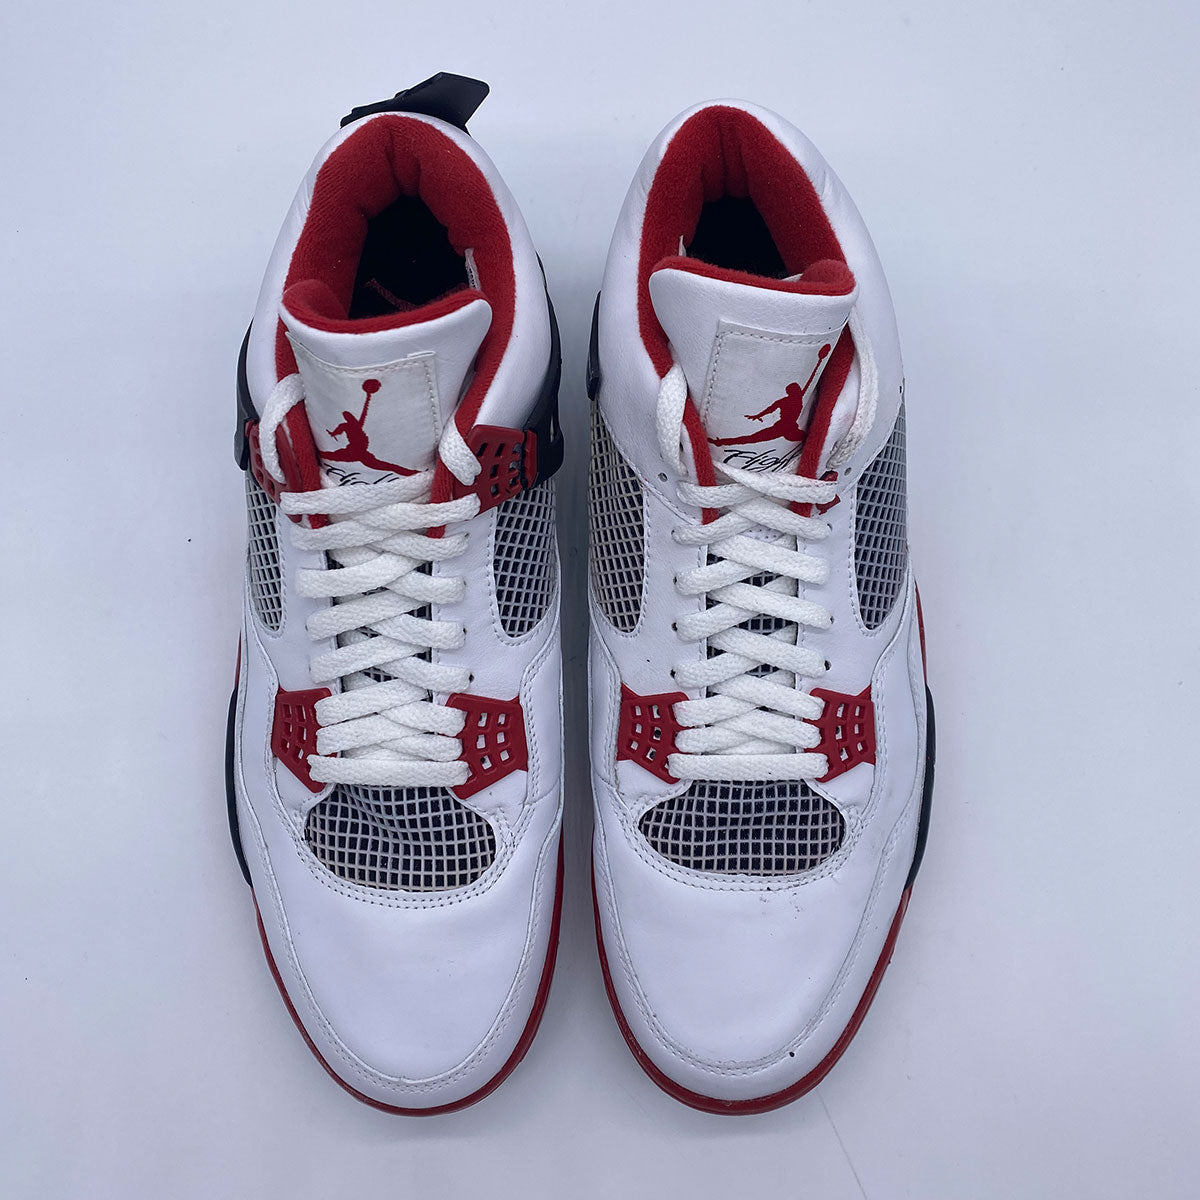 Air Jordan 4 Retro Fire Red Mars Blackmon 2006 size 12.5 (New with Defect)